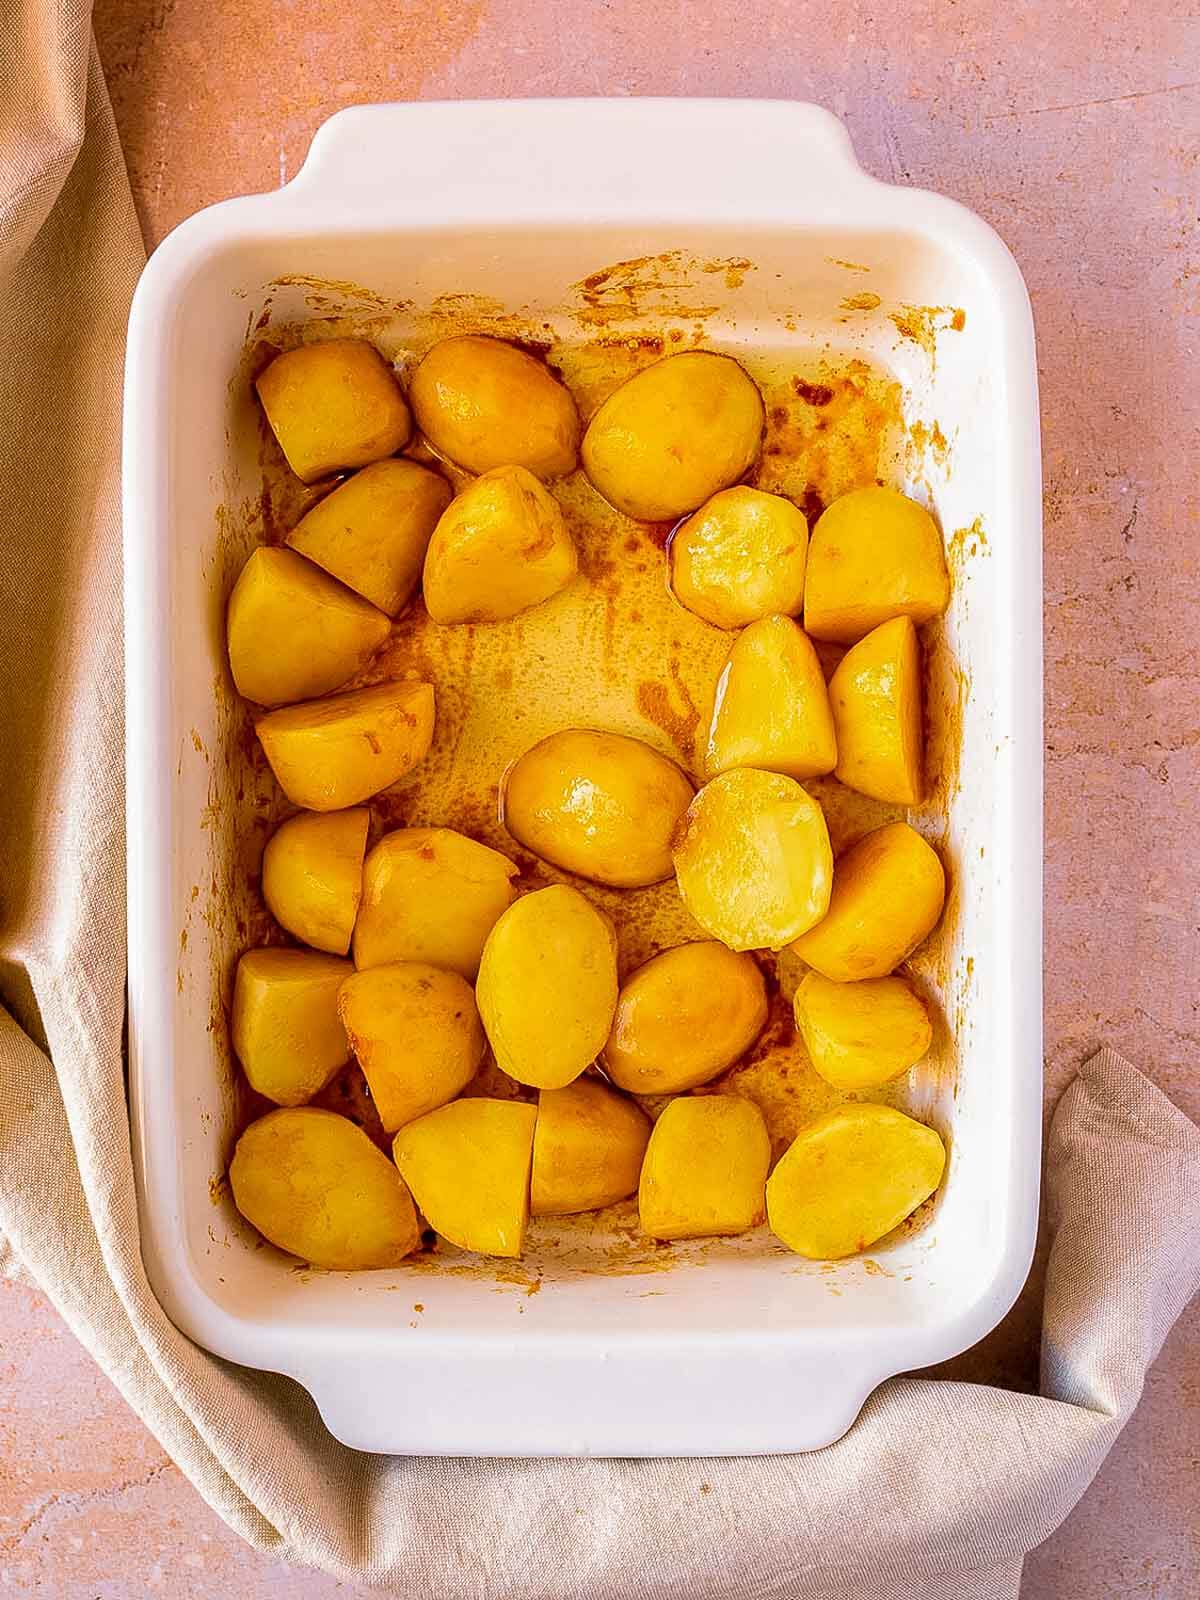 coat the potatoes with olive oil and marmite mixture.